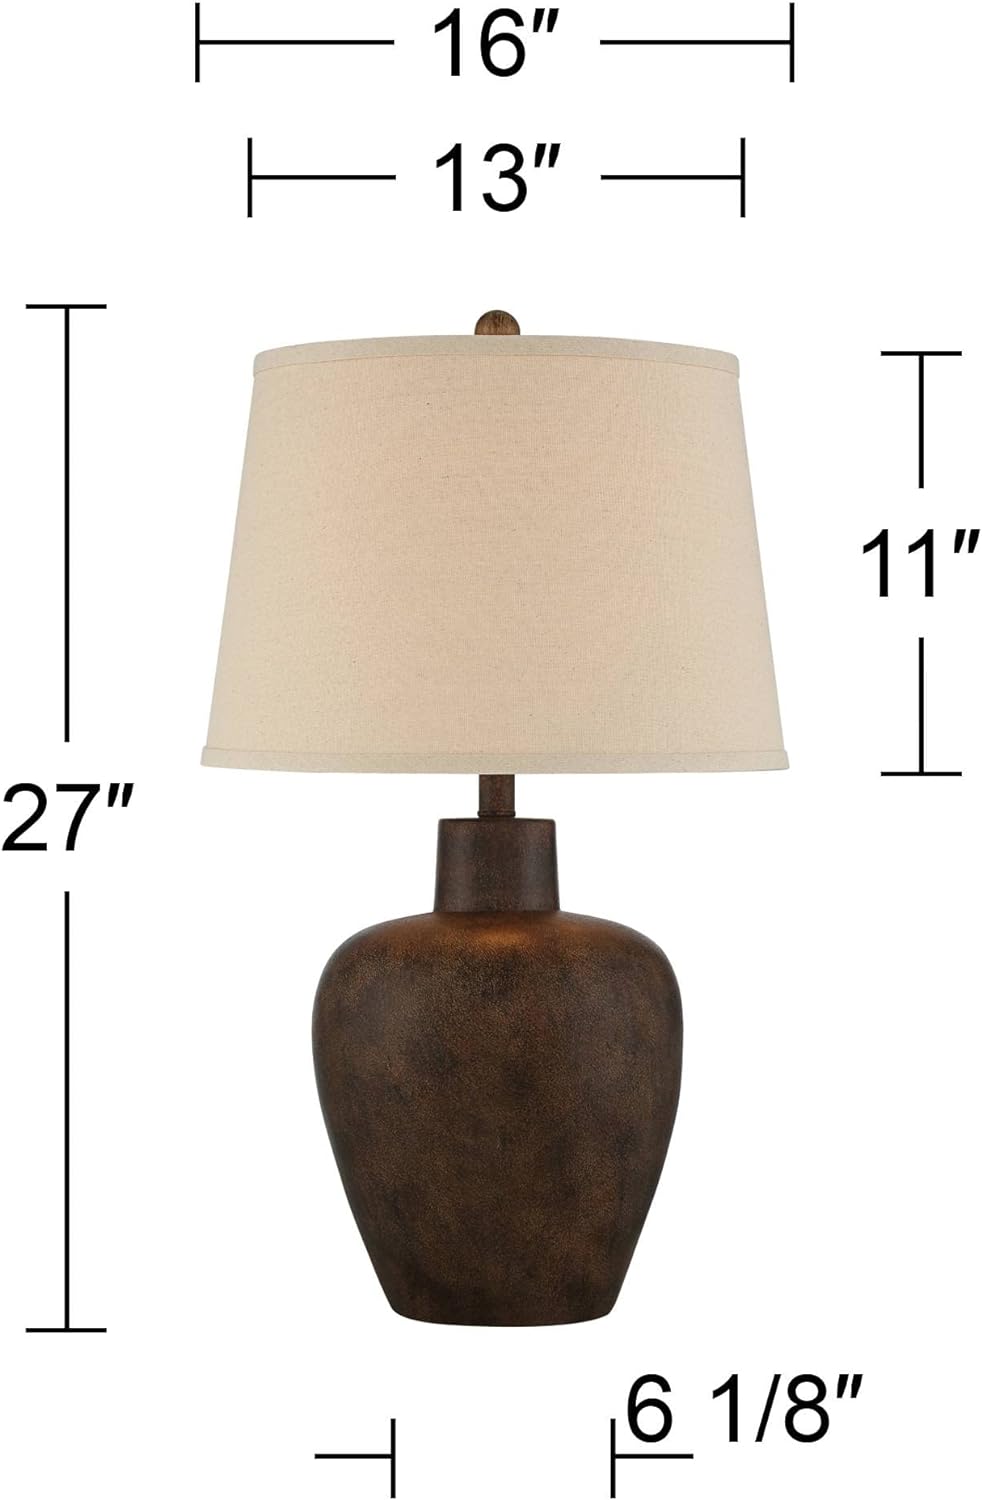 Regency Hill Glenn Farmhouse Rustic Southwestern Table Lamps 27" Tall Set of 2 Dark Terra Cotta Tapered Fabric Drum Shade Decor for Living Room Bedroom House Bedside Nightstand Home Office